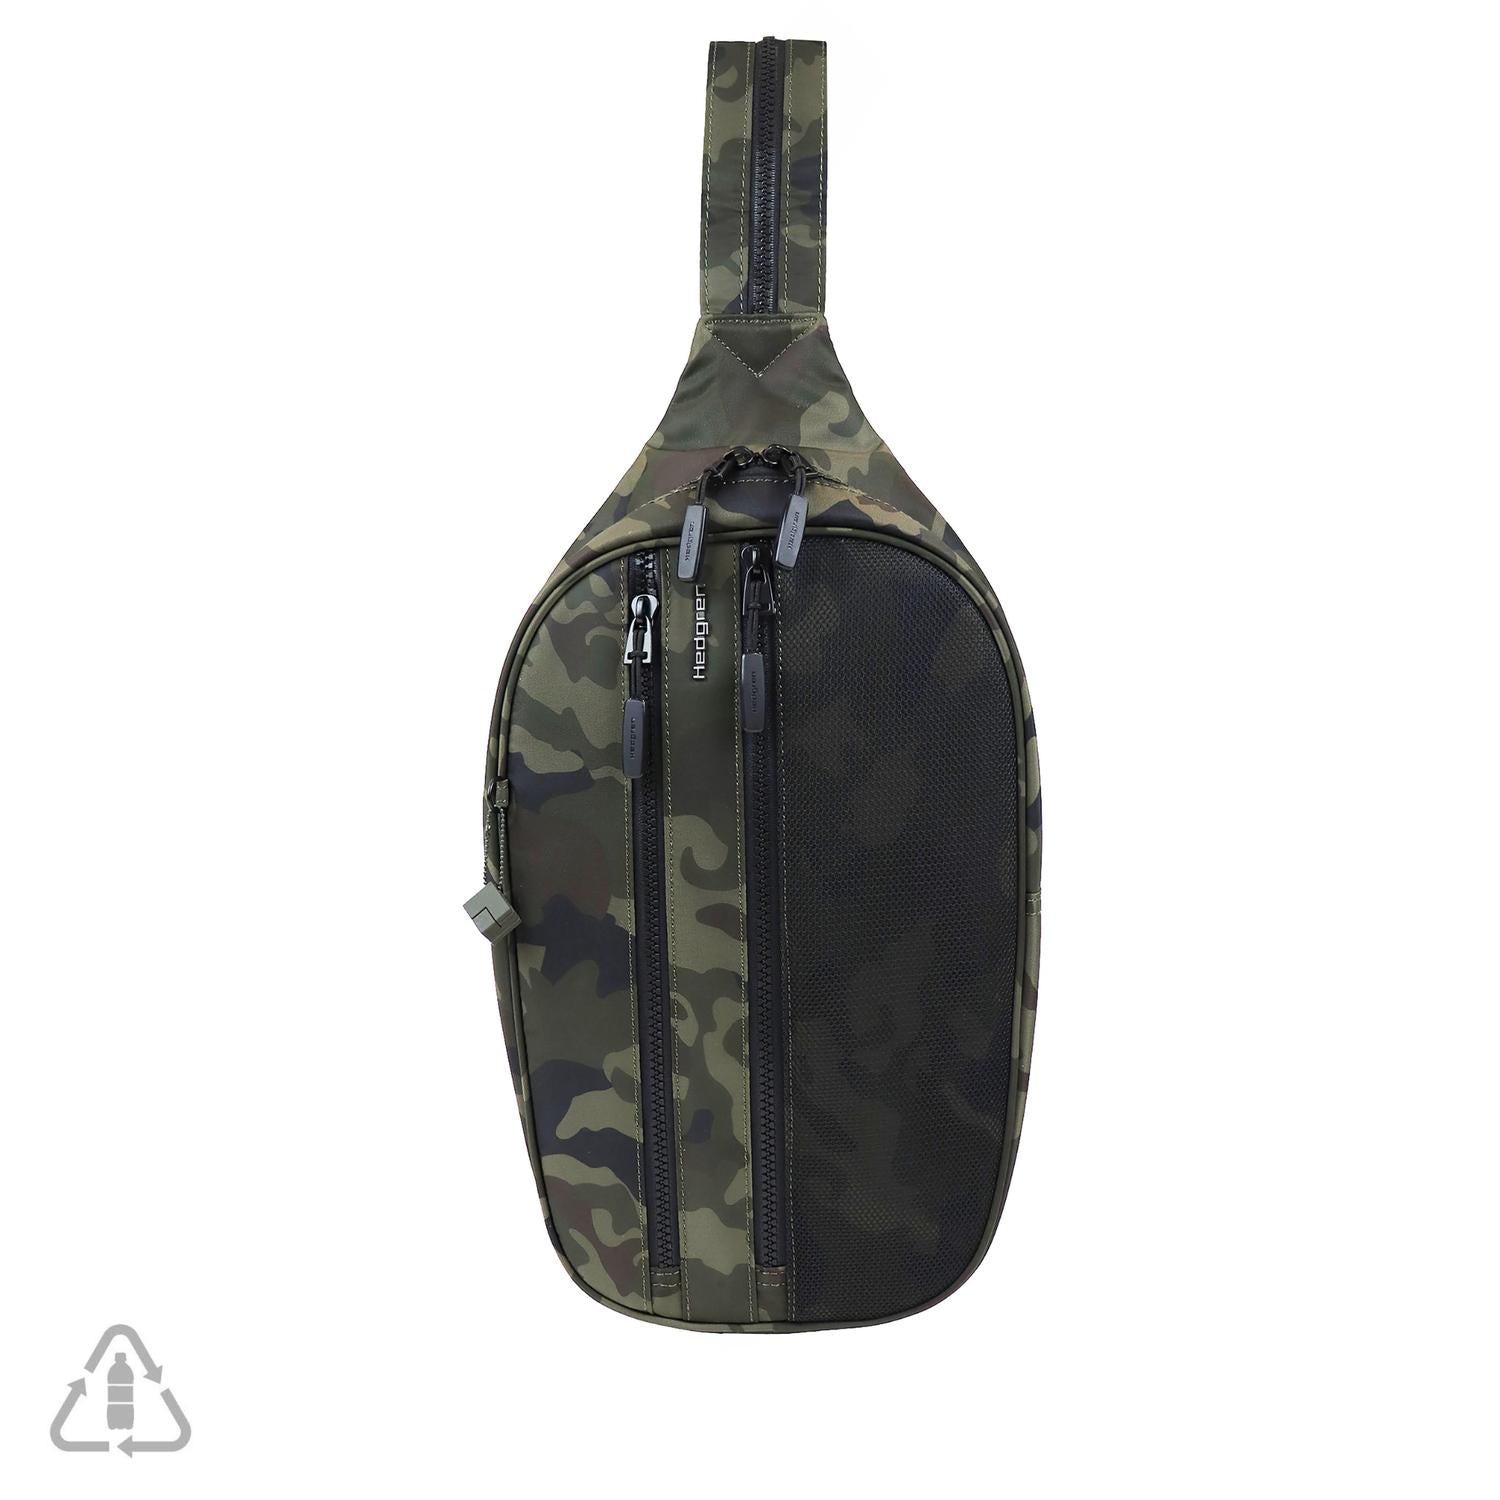 HEDGREN Meadows Sustainably Made Sling in Olive Camo